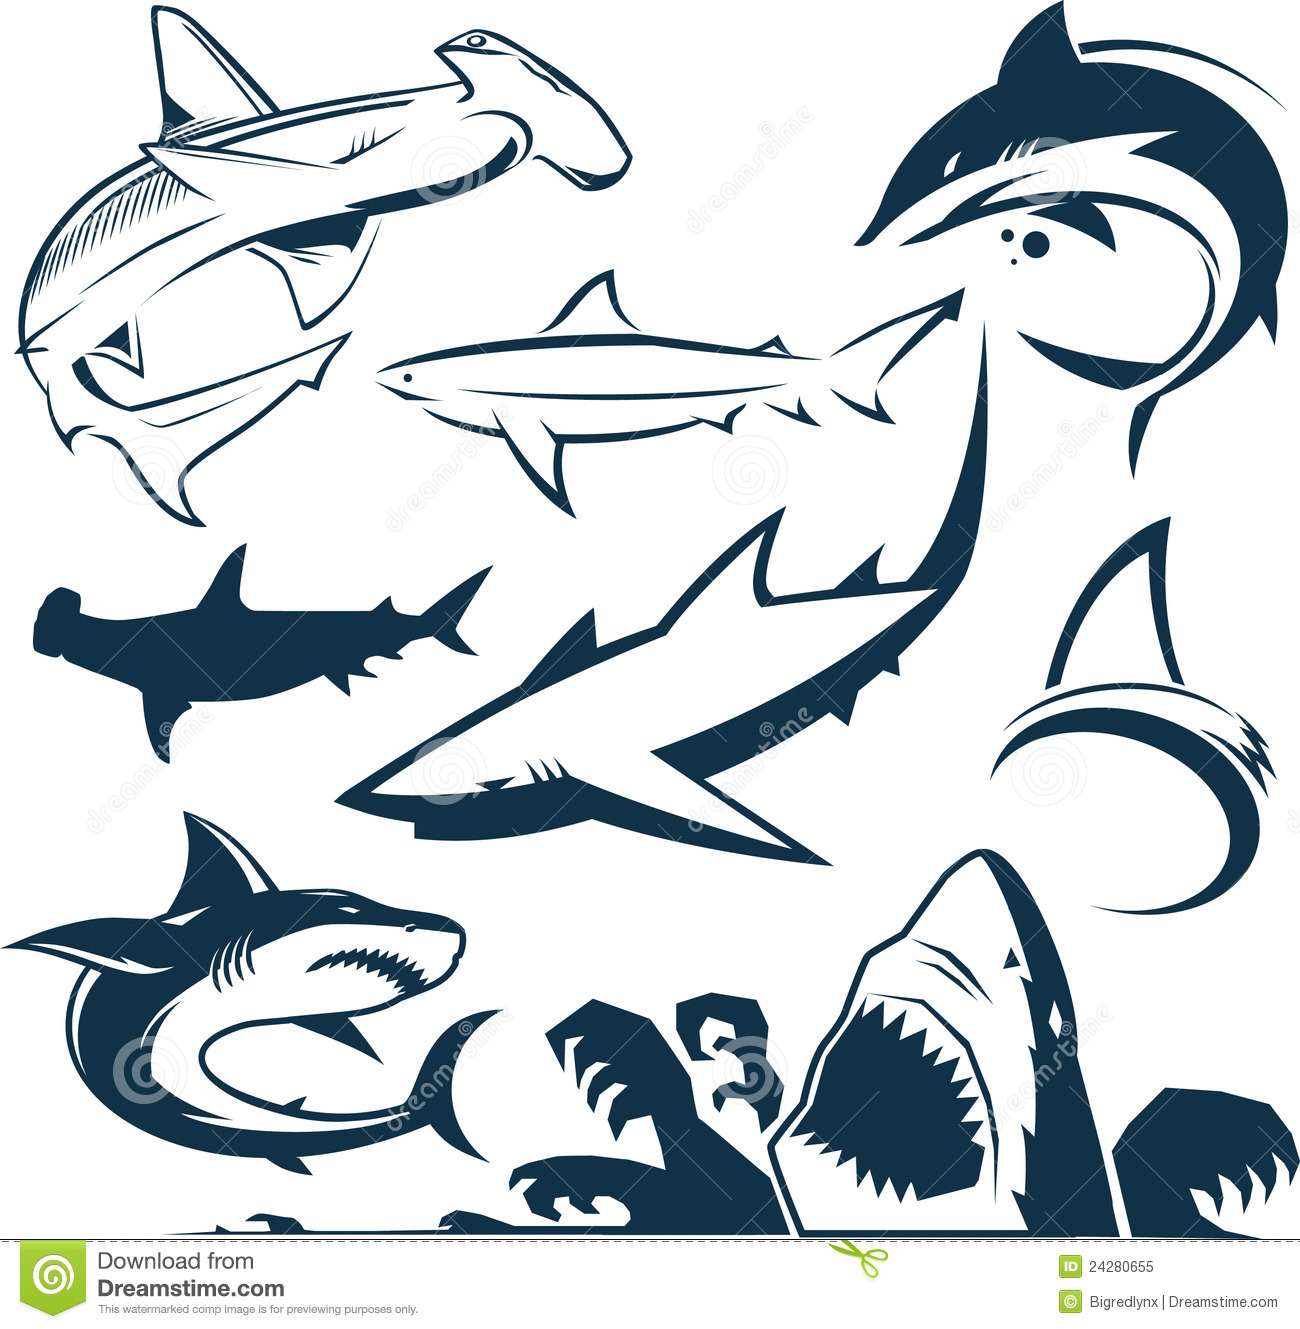 Shark Collection Royalty Free Stock Photo   Image  24280655